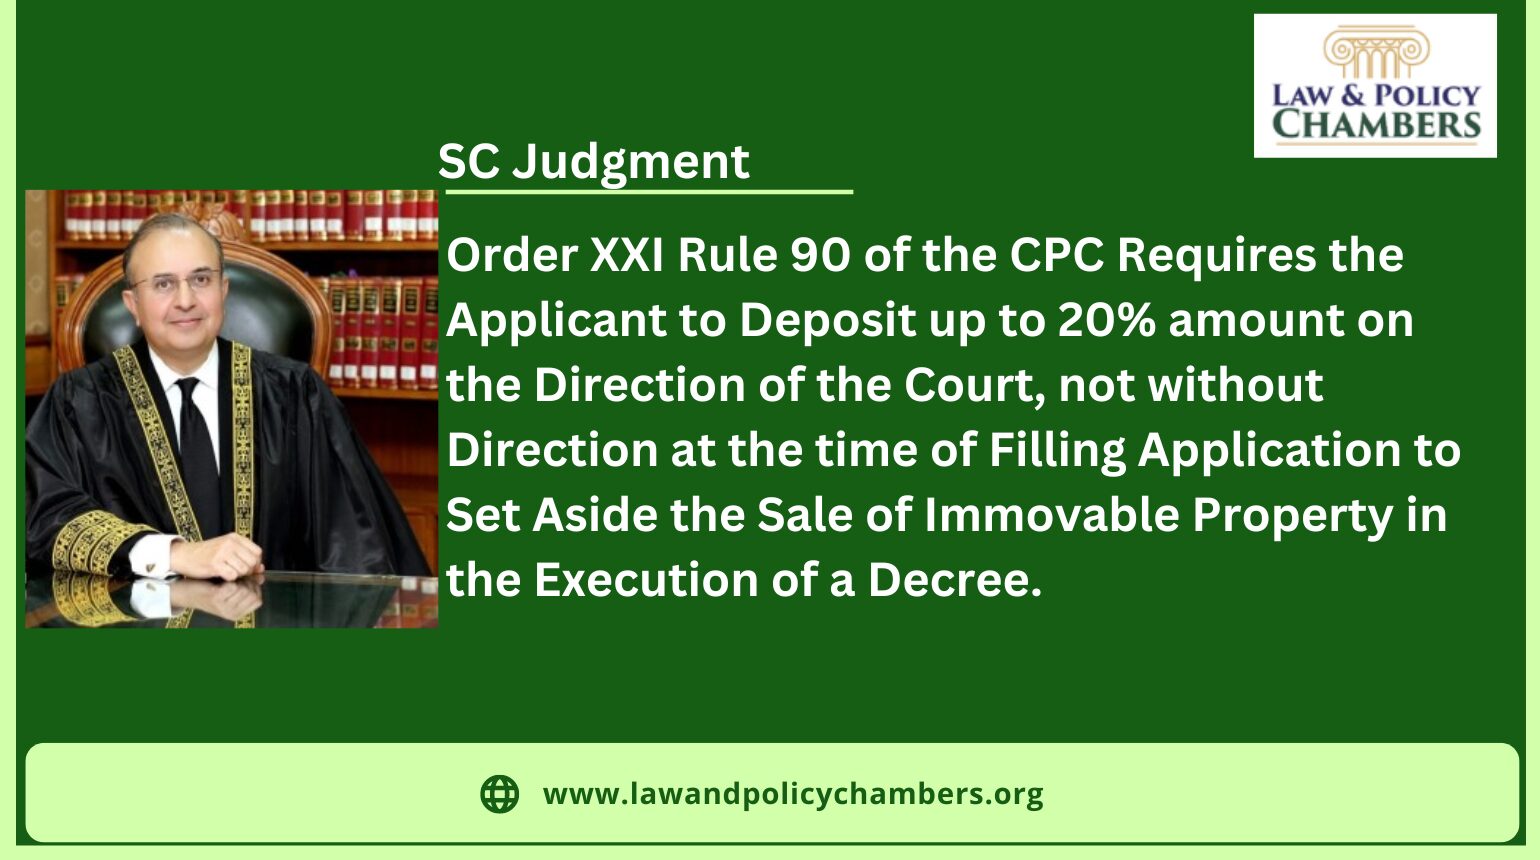 Order XXI Rule 90 of the CPC Requires the Applicant to Deposit up to 20% amount on the Direction of the Court, not without Direction at the time of Filling Application.